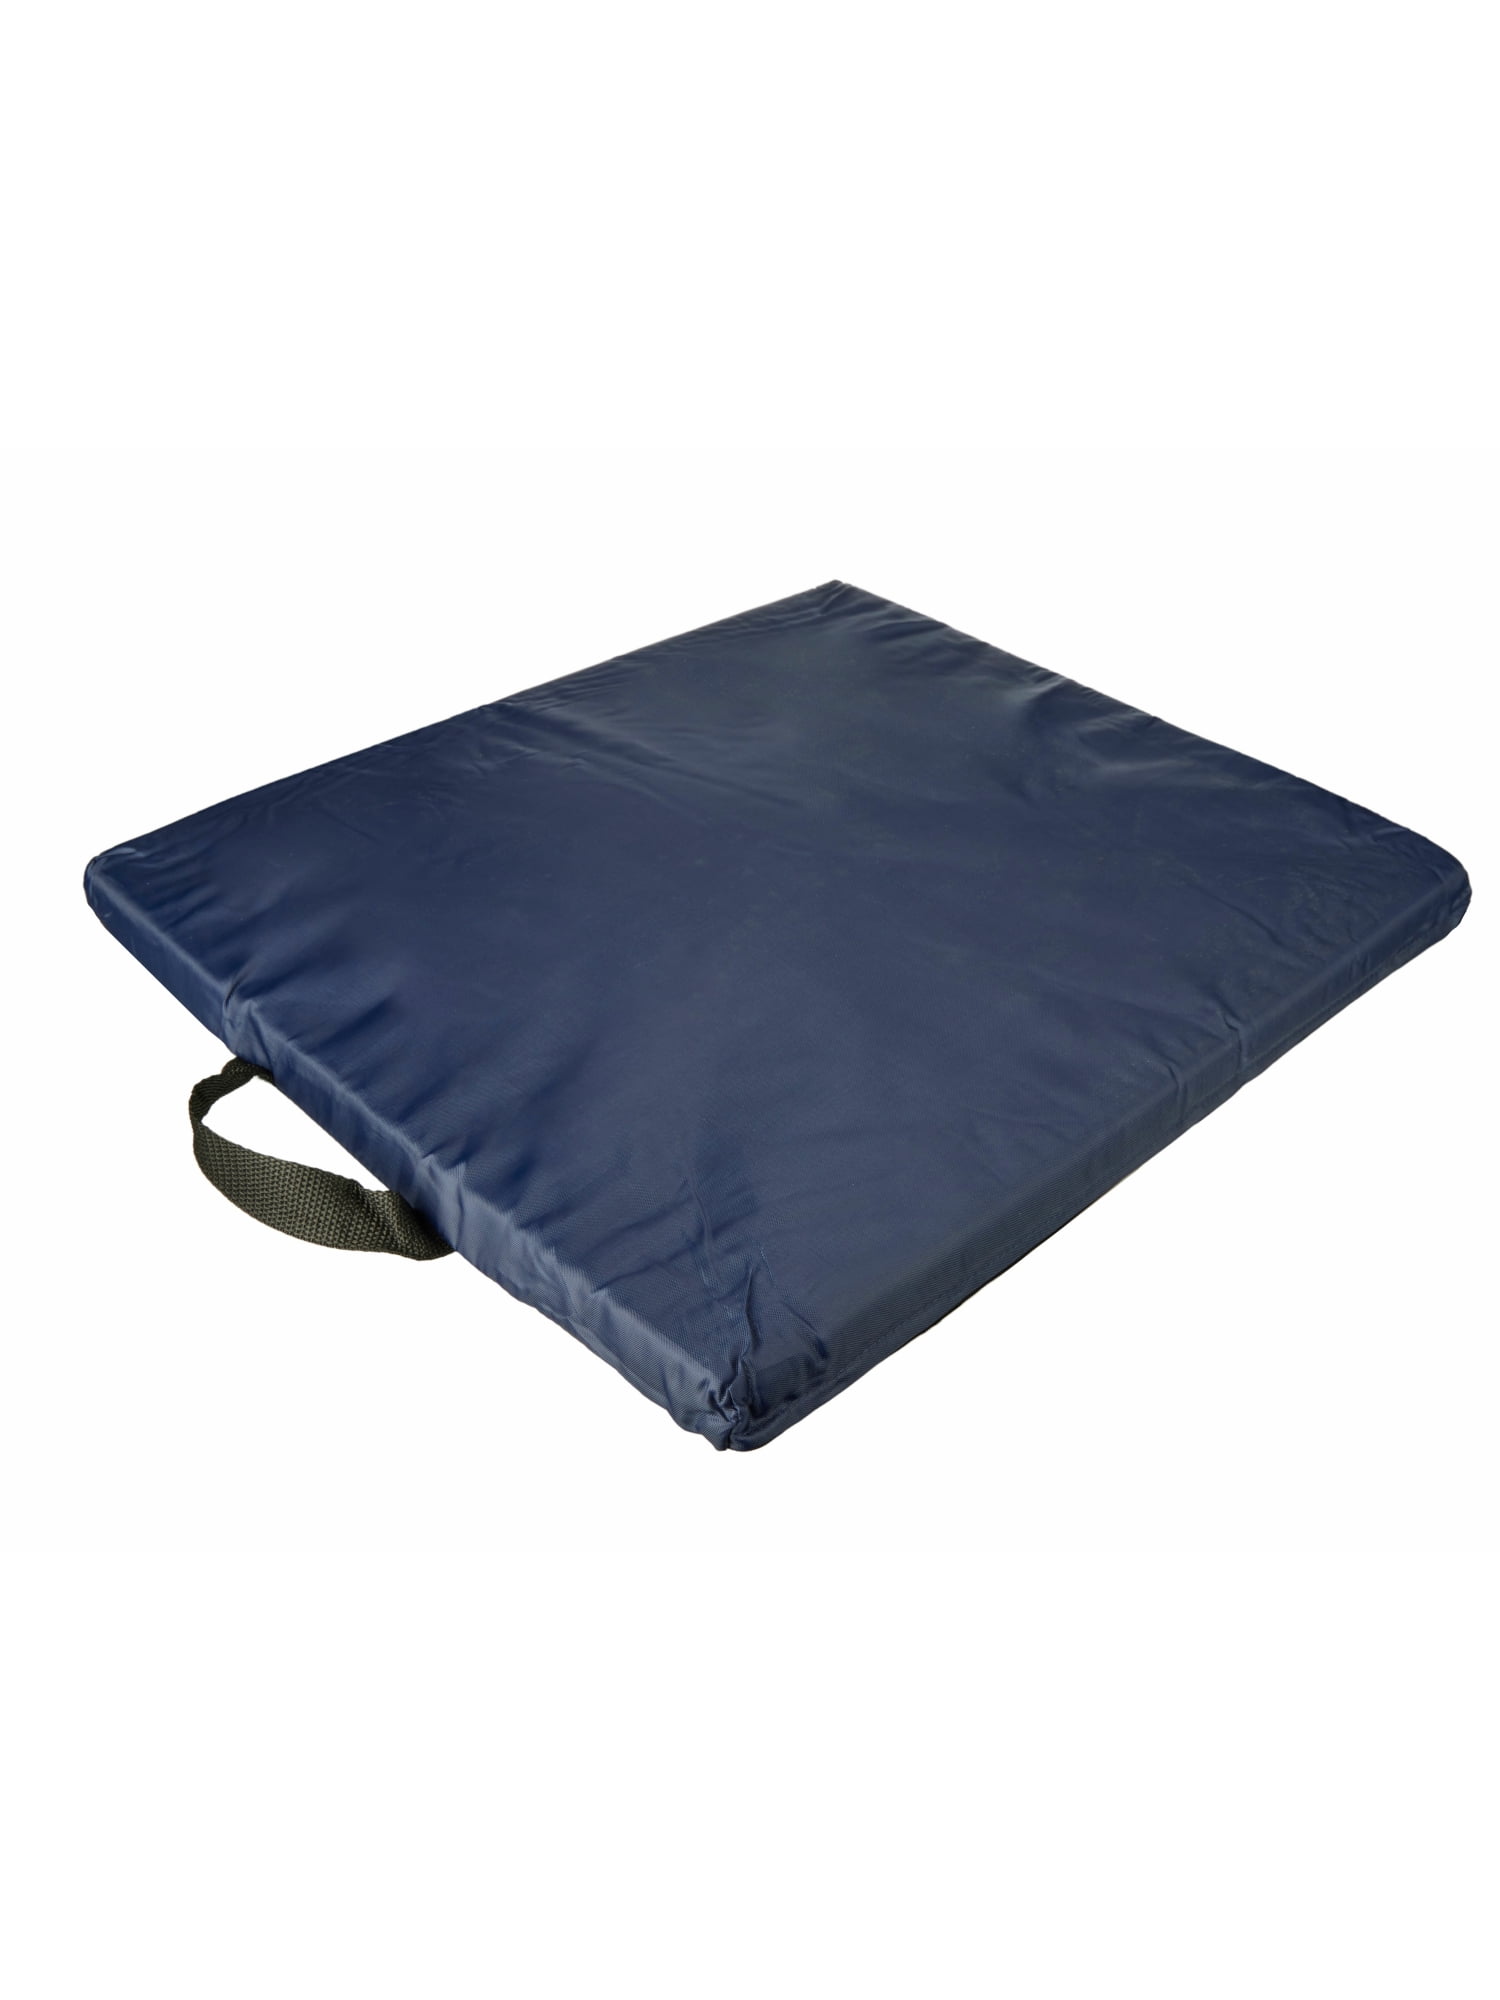 Gel Wheelchair Cushion with Removable Cover, 16x20x2 Navy Color